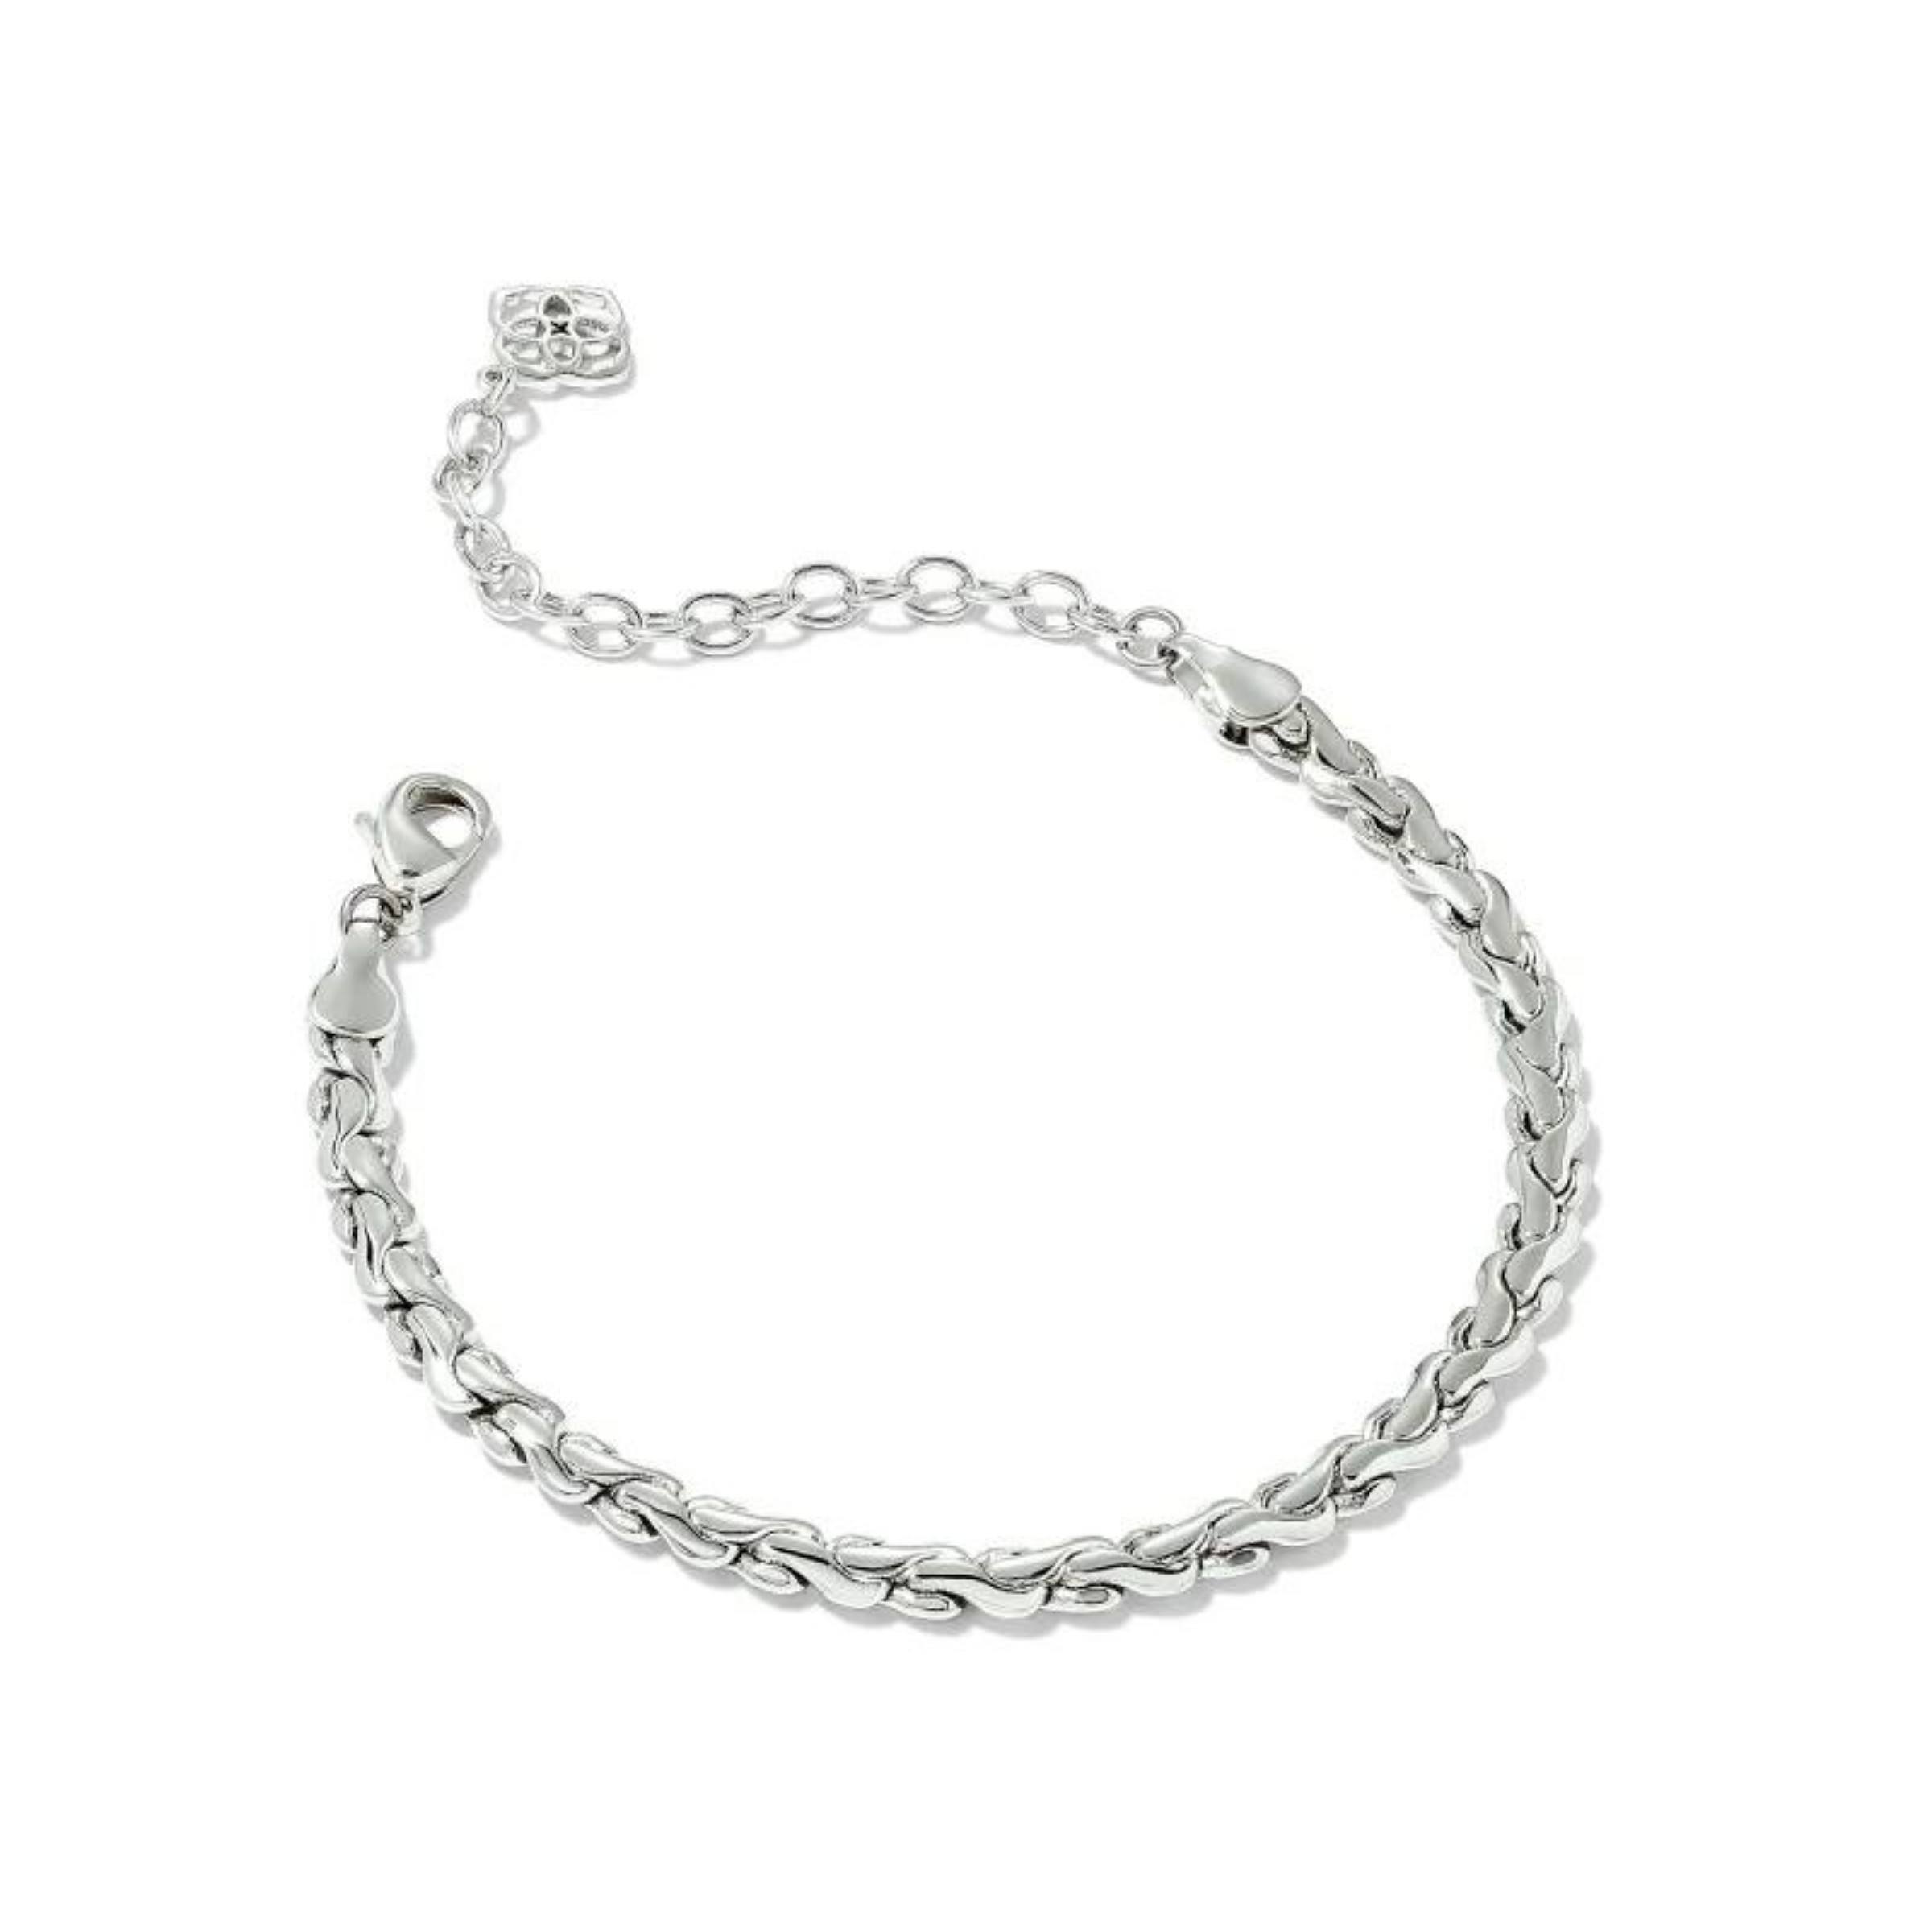 Adjustable chain bracelet in silver. This bracelet is pictured on a white background. 